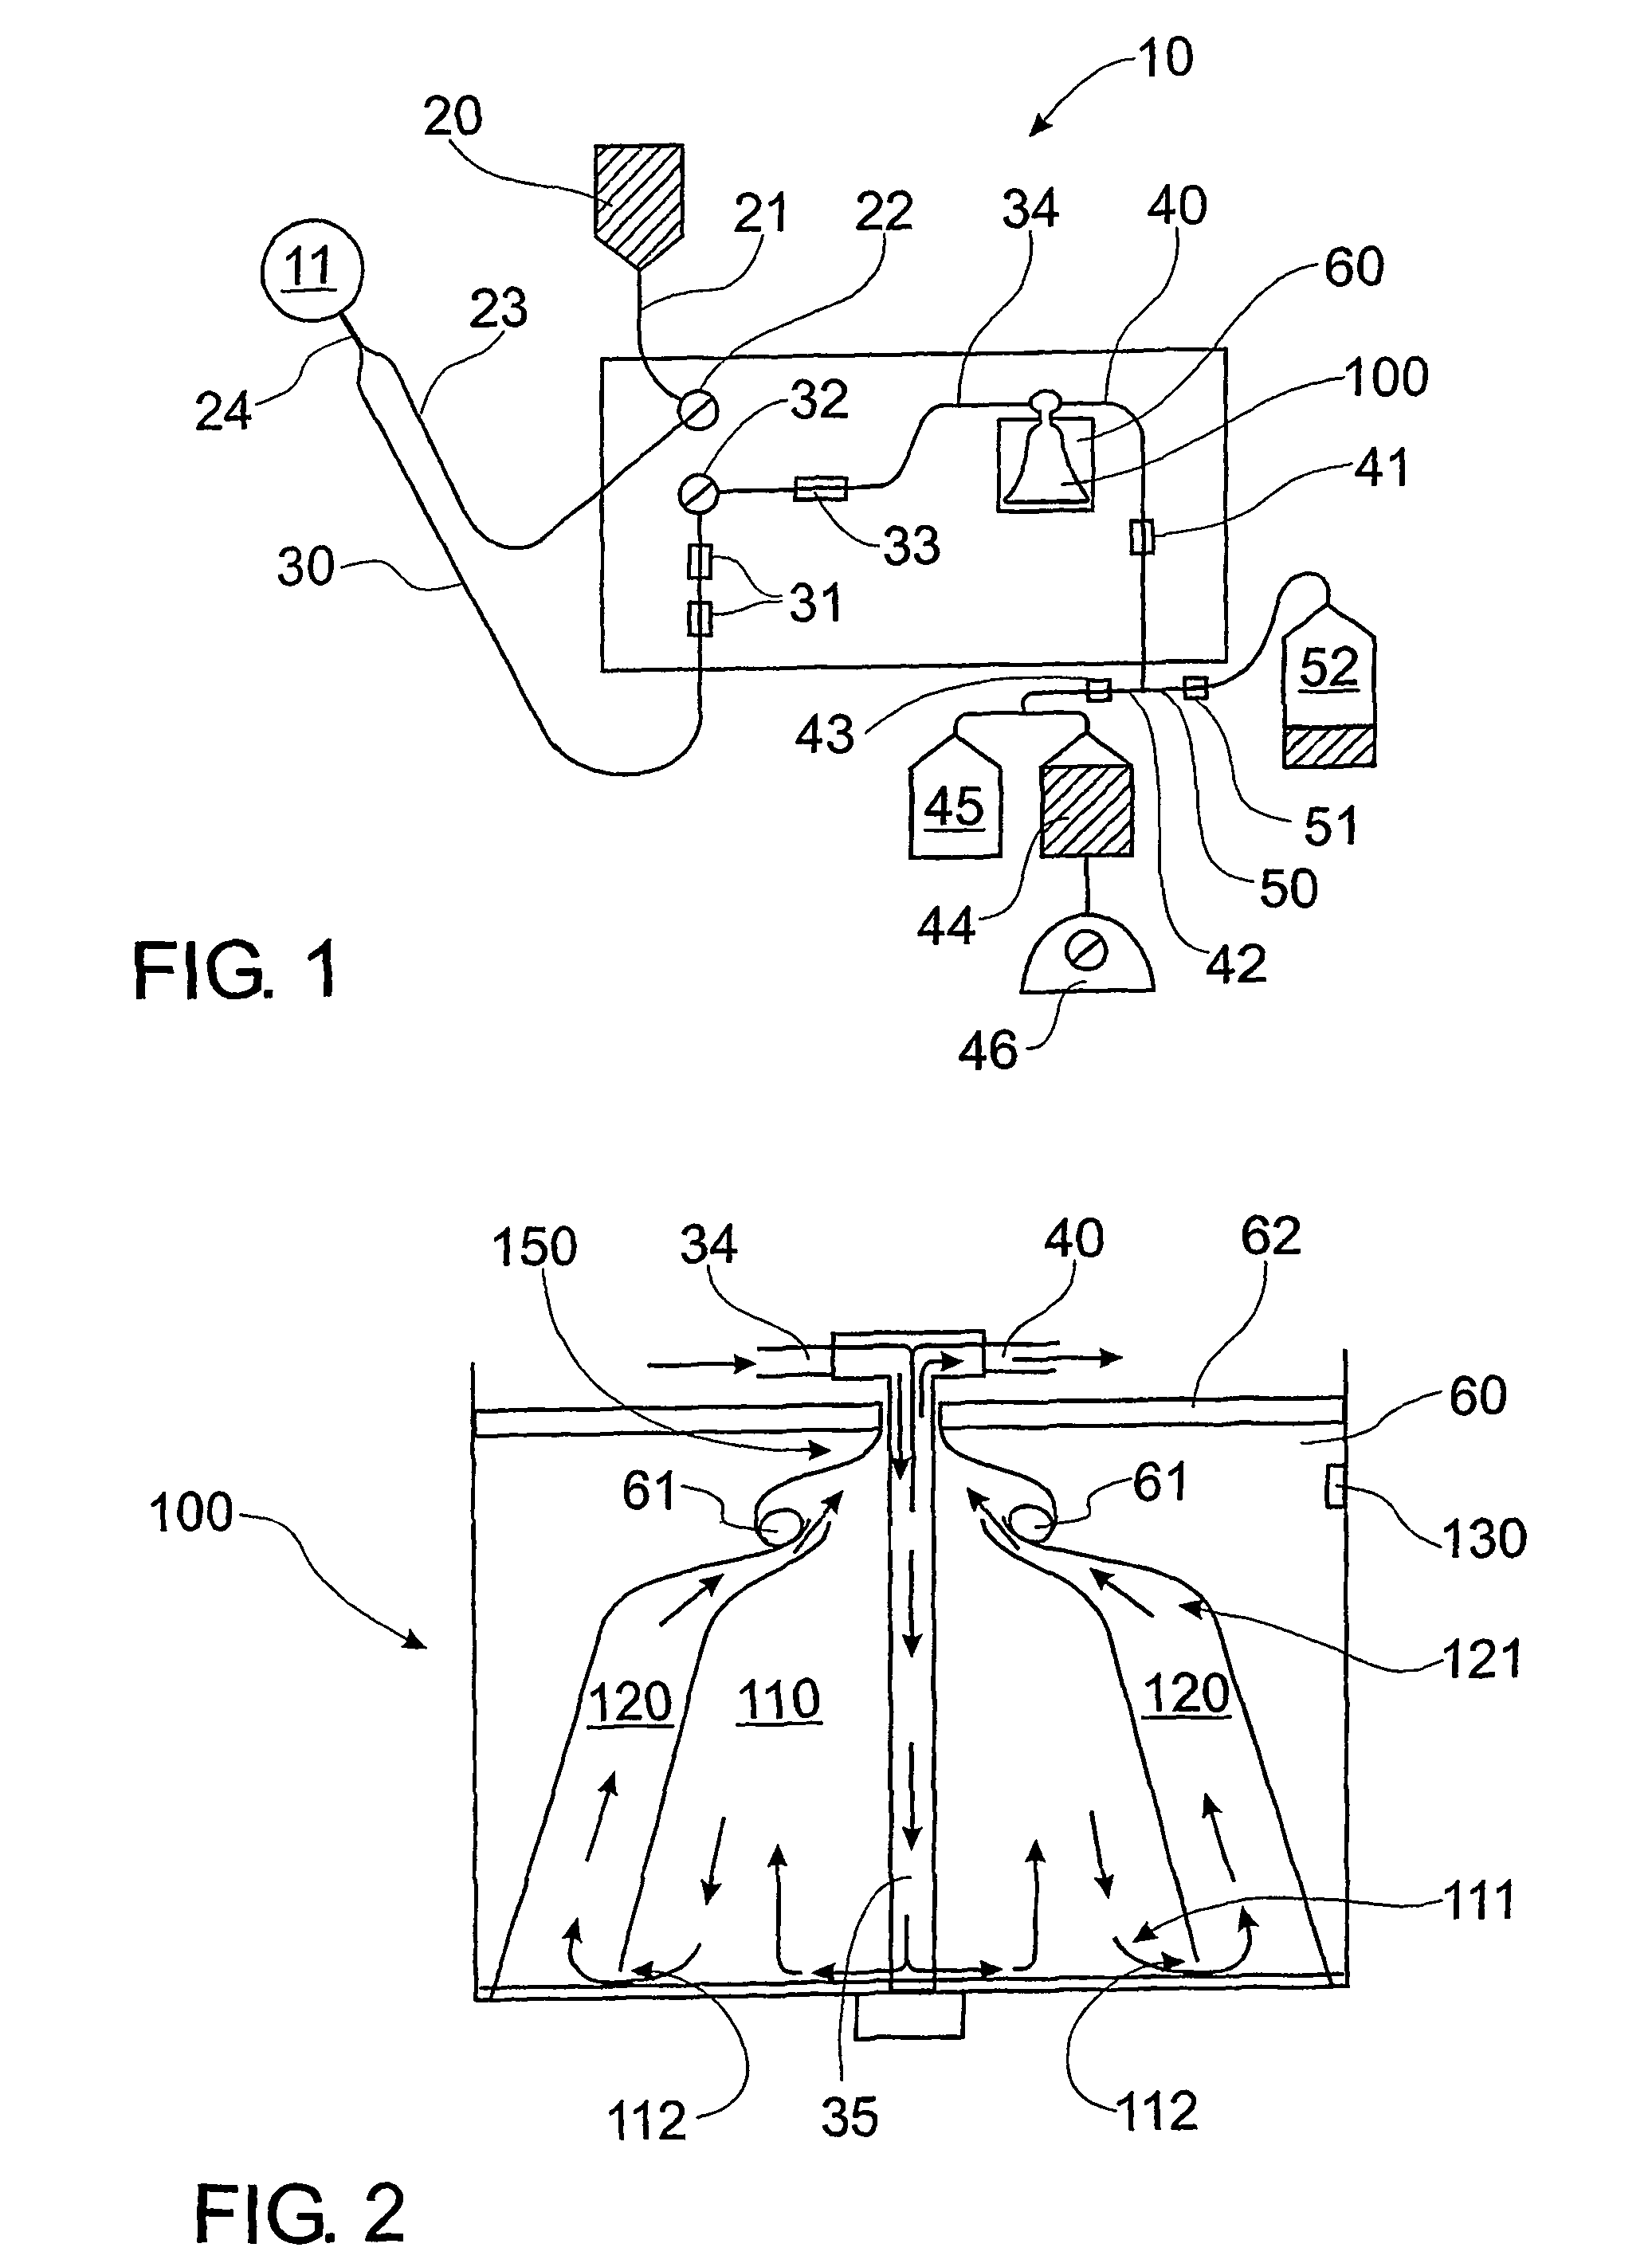 Isolated plasma and method for hyperimmunisation and plasma collection